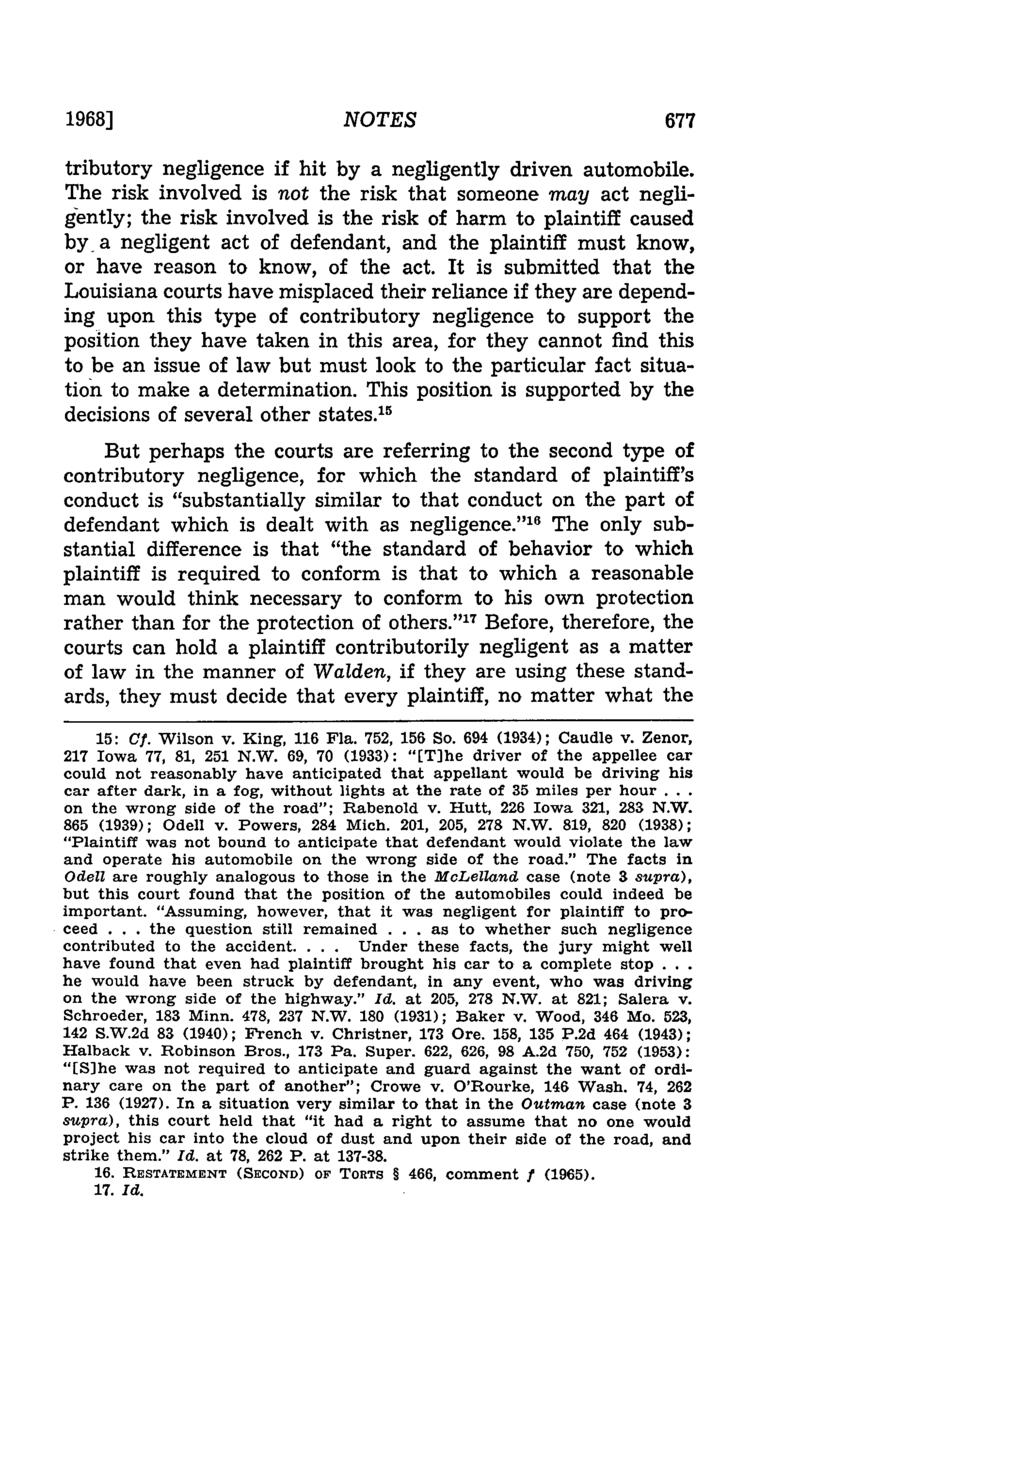 1968] NOTES tributory negligence if hit by a negligently driven automobile.